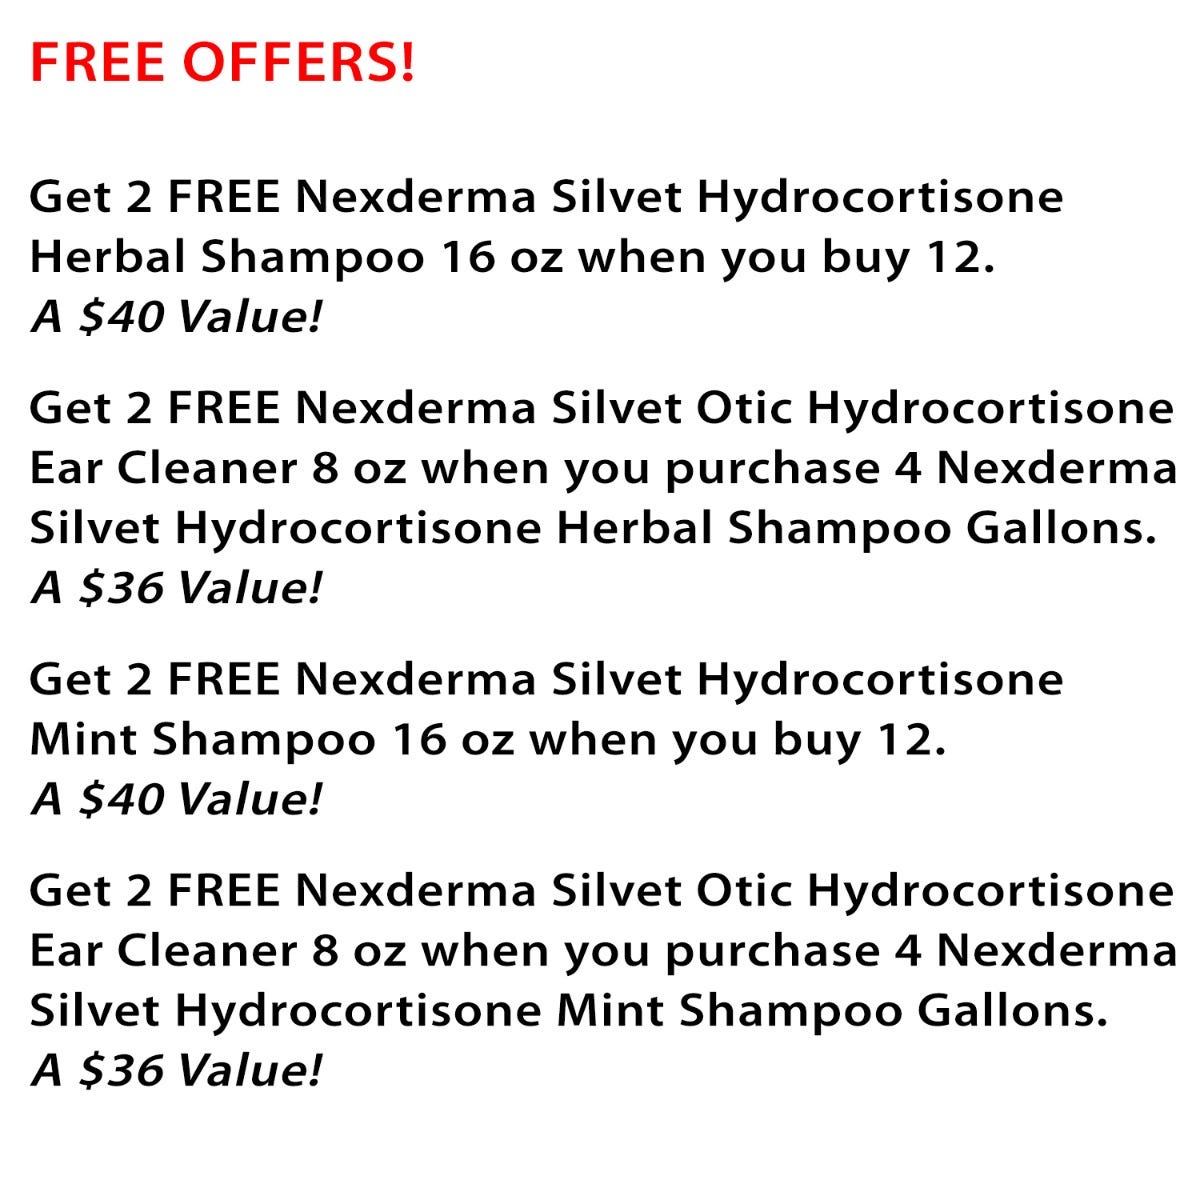 Nexderma special promotions